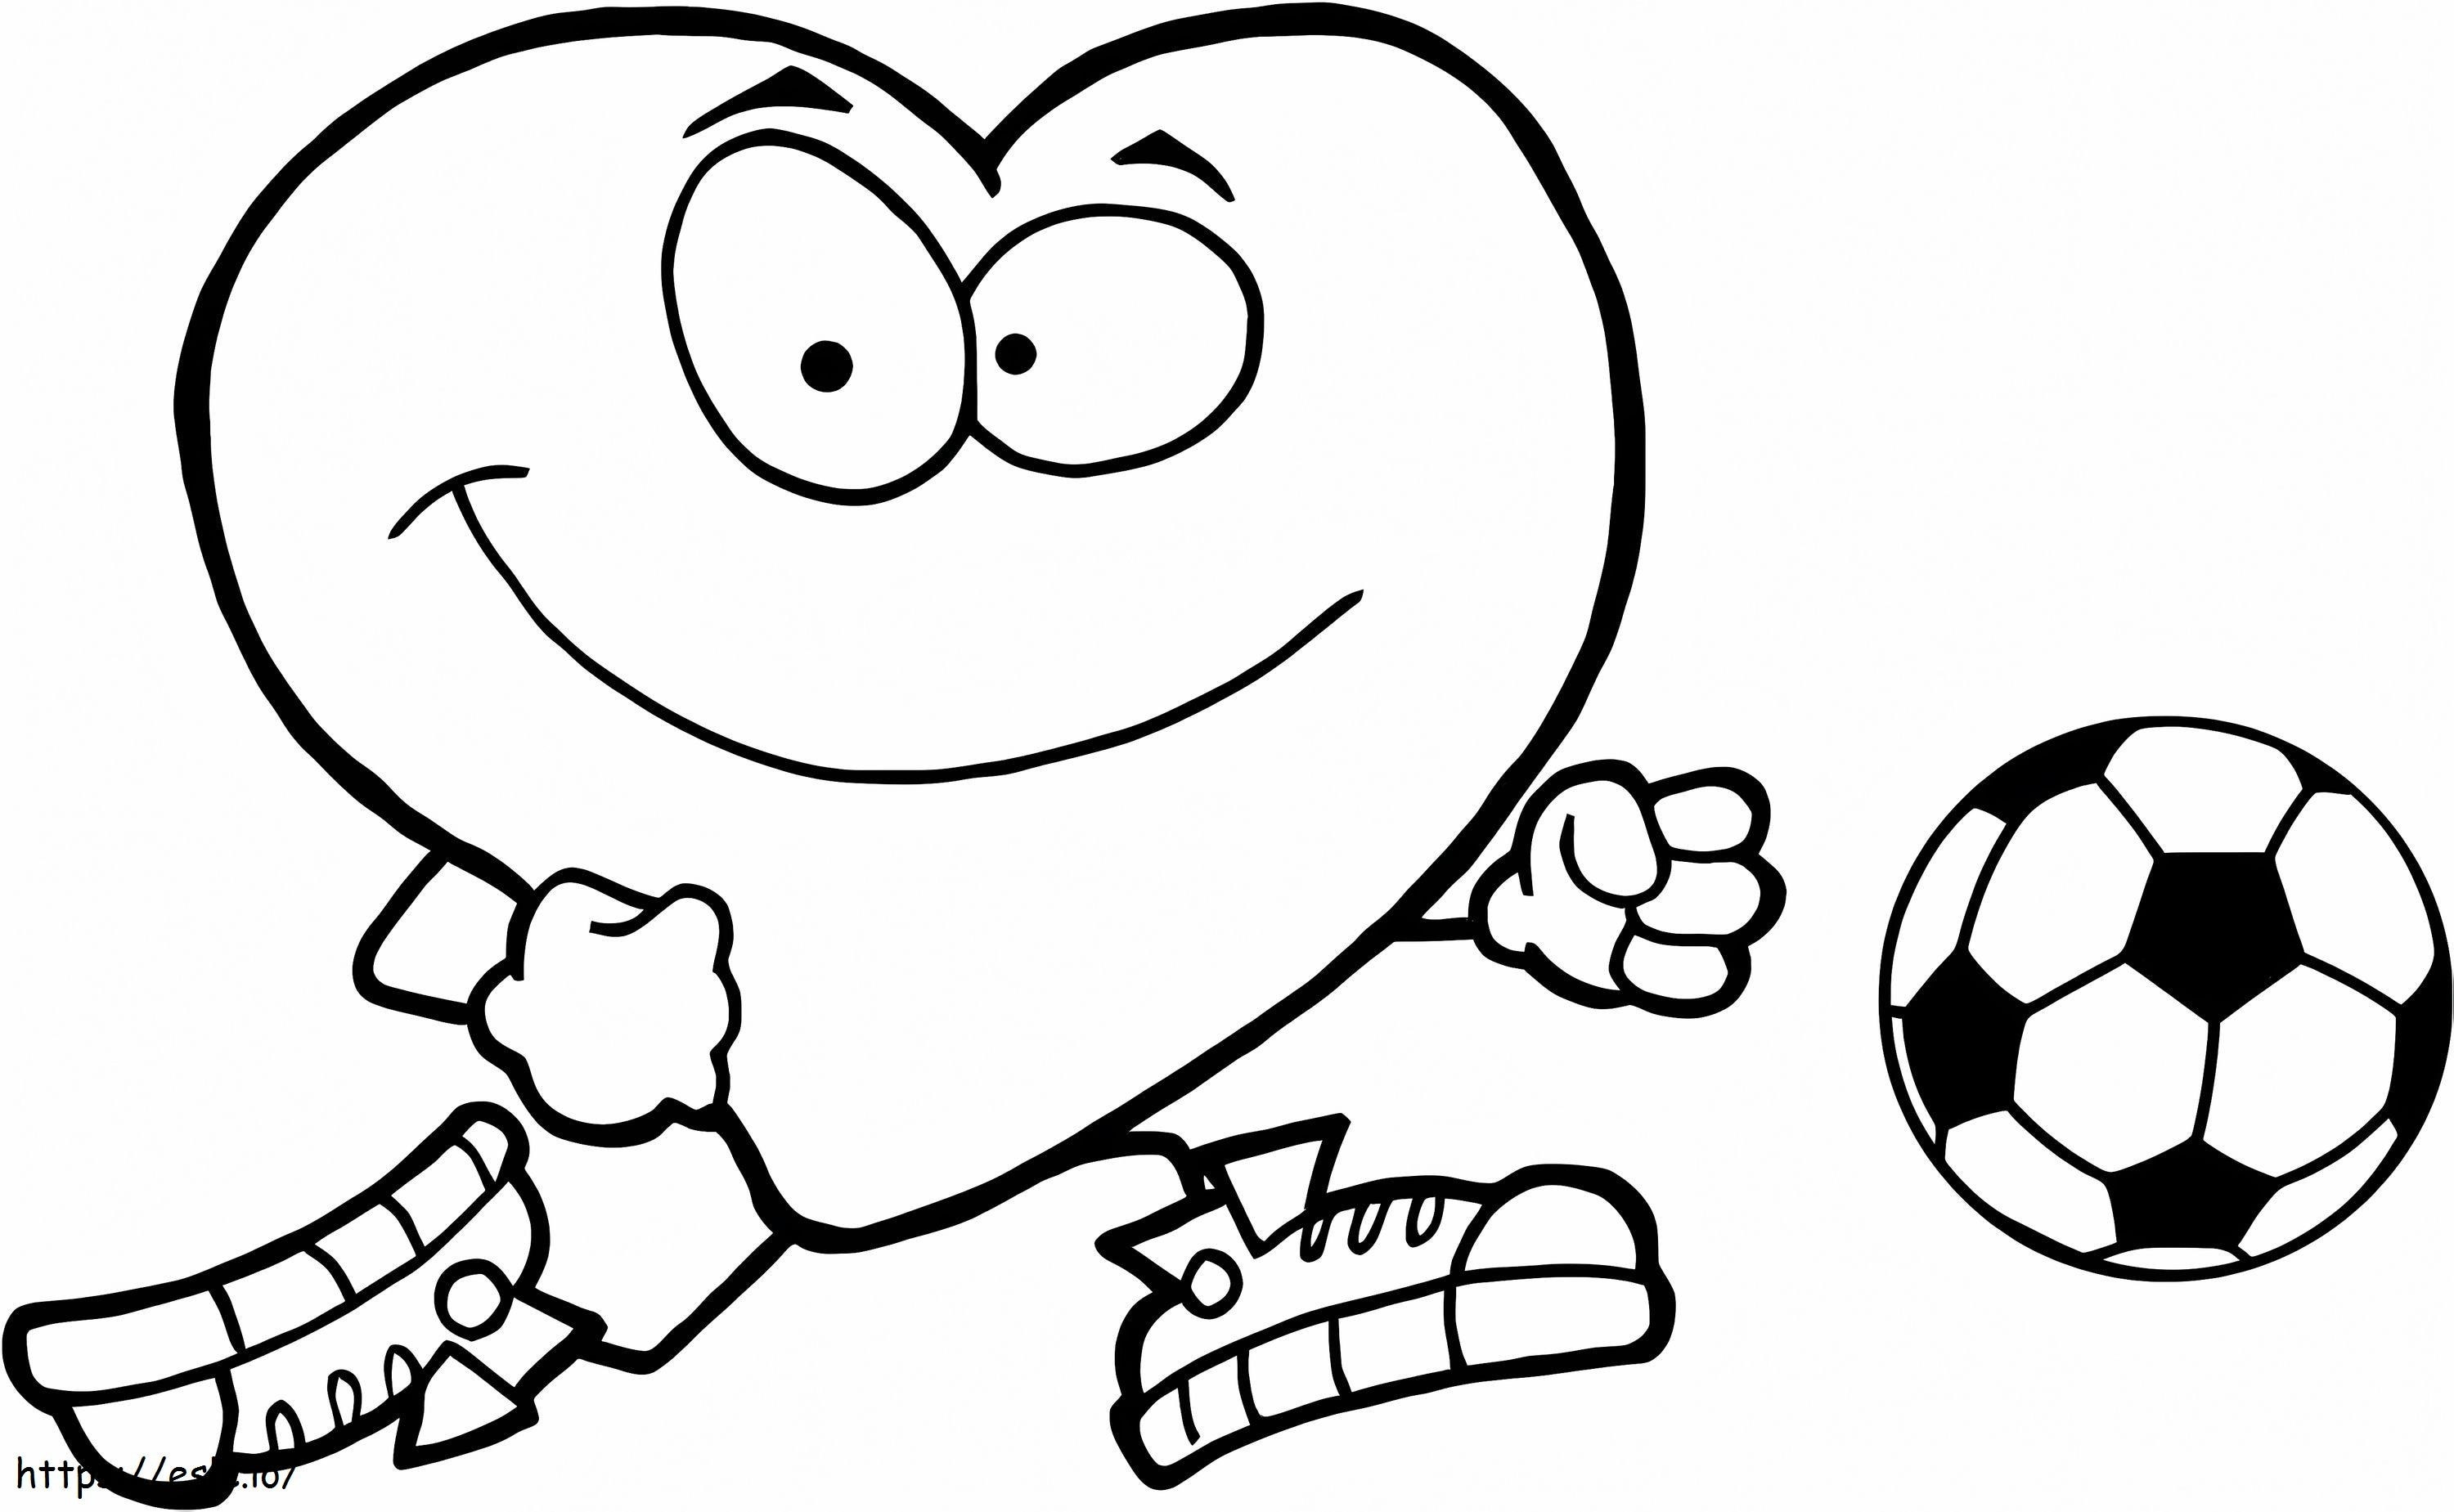 Heart Playing Soccer coloring page